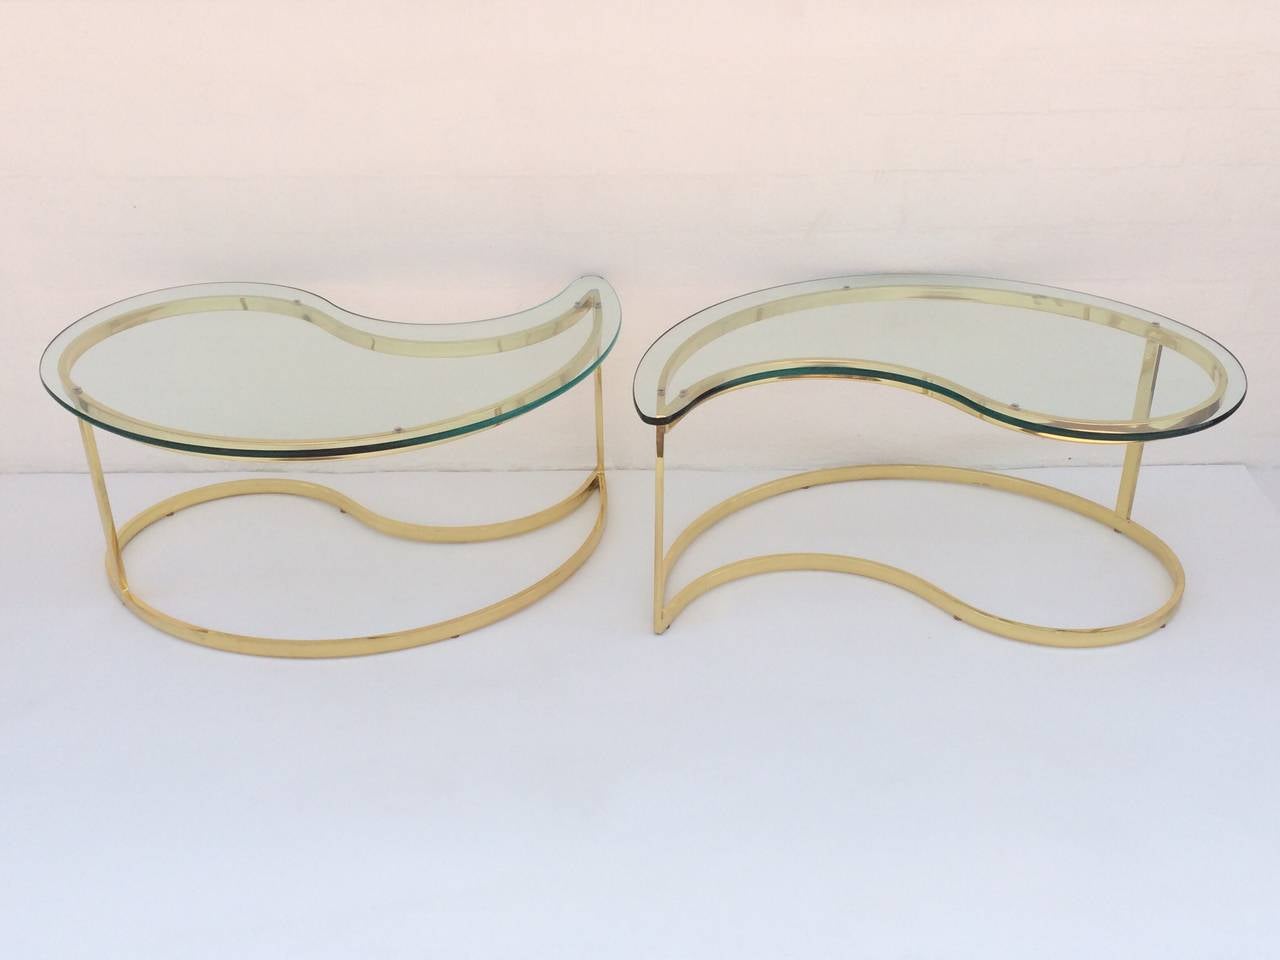 A pair of polished brass and glass cocktail or coffee tables designed by Milo Baughman. 
Consist of polished brass frames and 1/2 thick glass top. 
These fun tables can be used together as a cocktail table or as side tables.